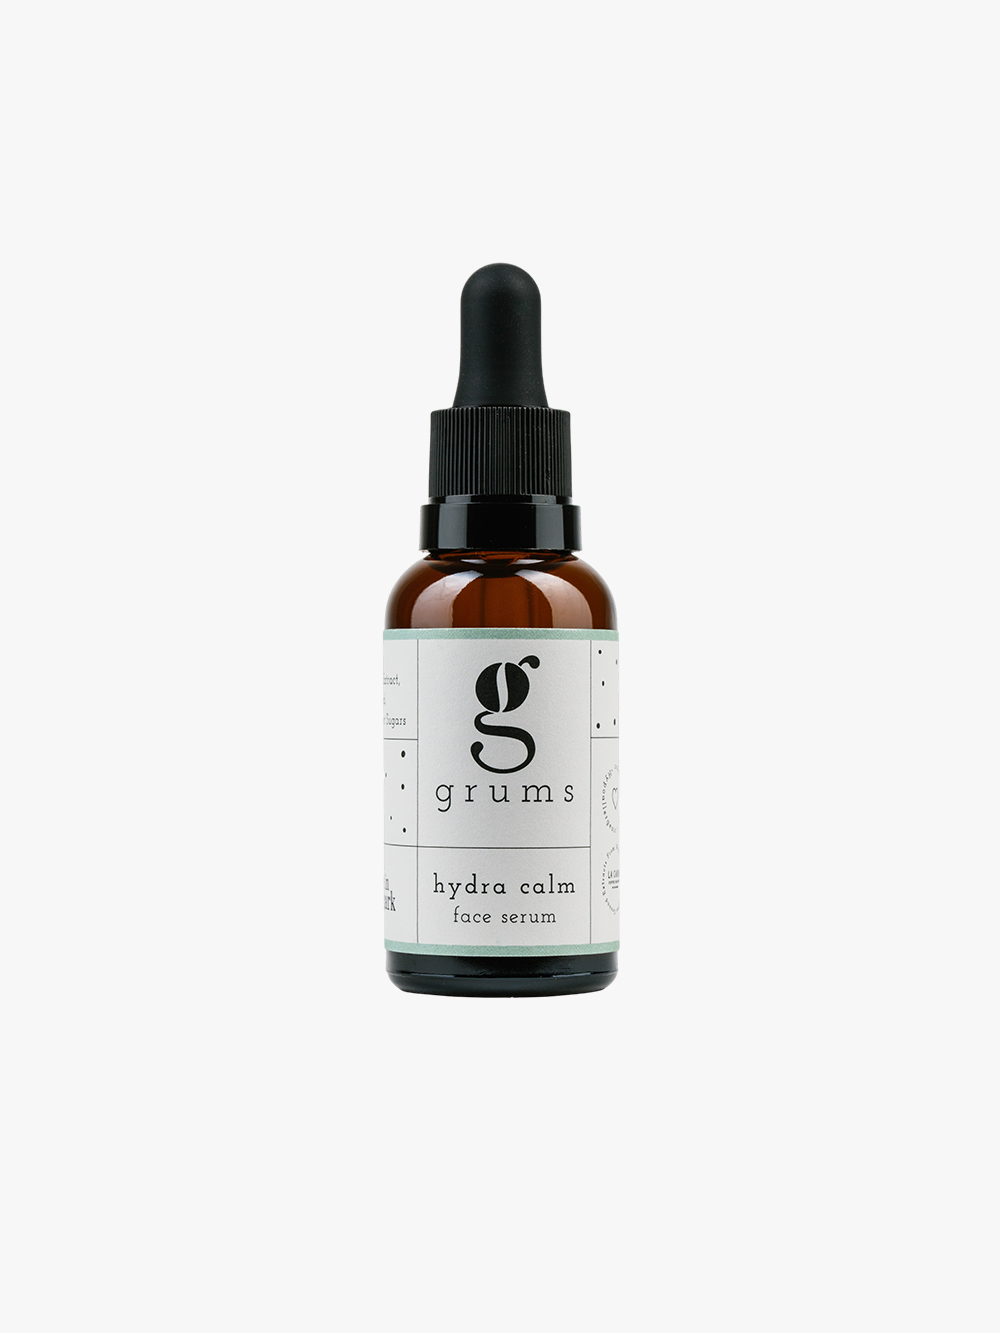 Hydra calm face serum | grums | Dispatched in 1-2 Days